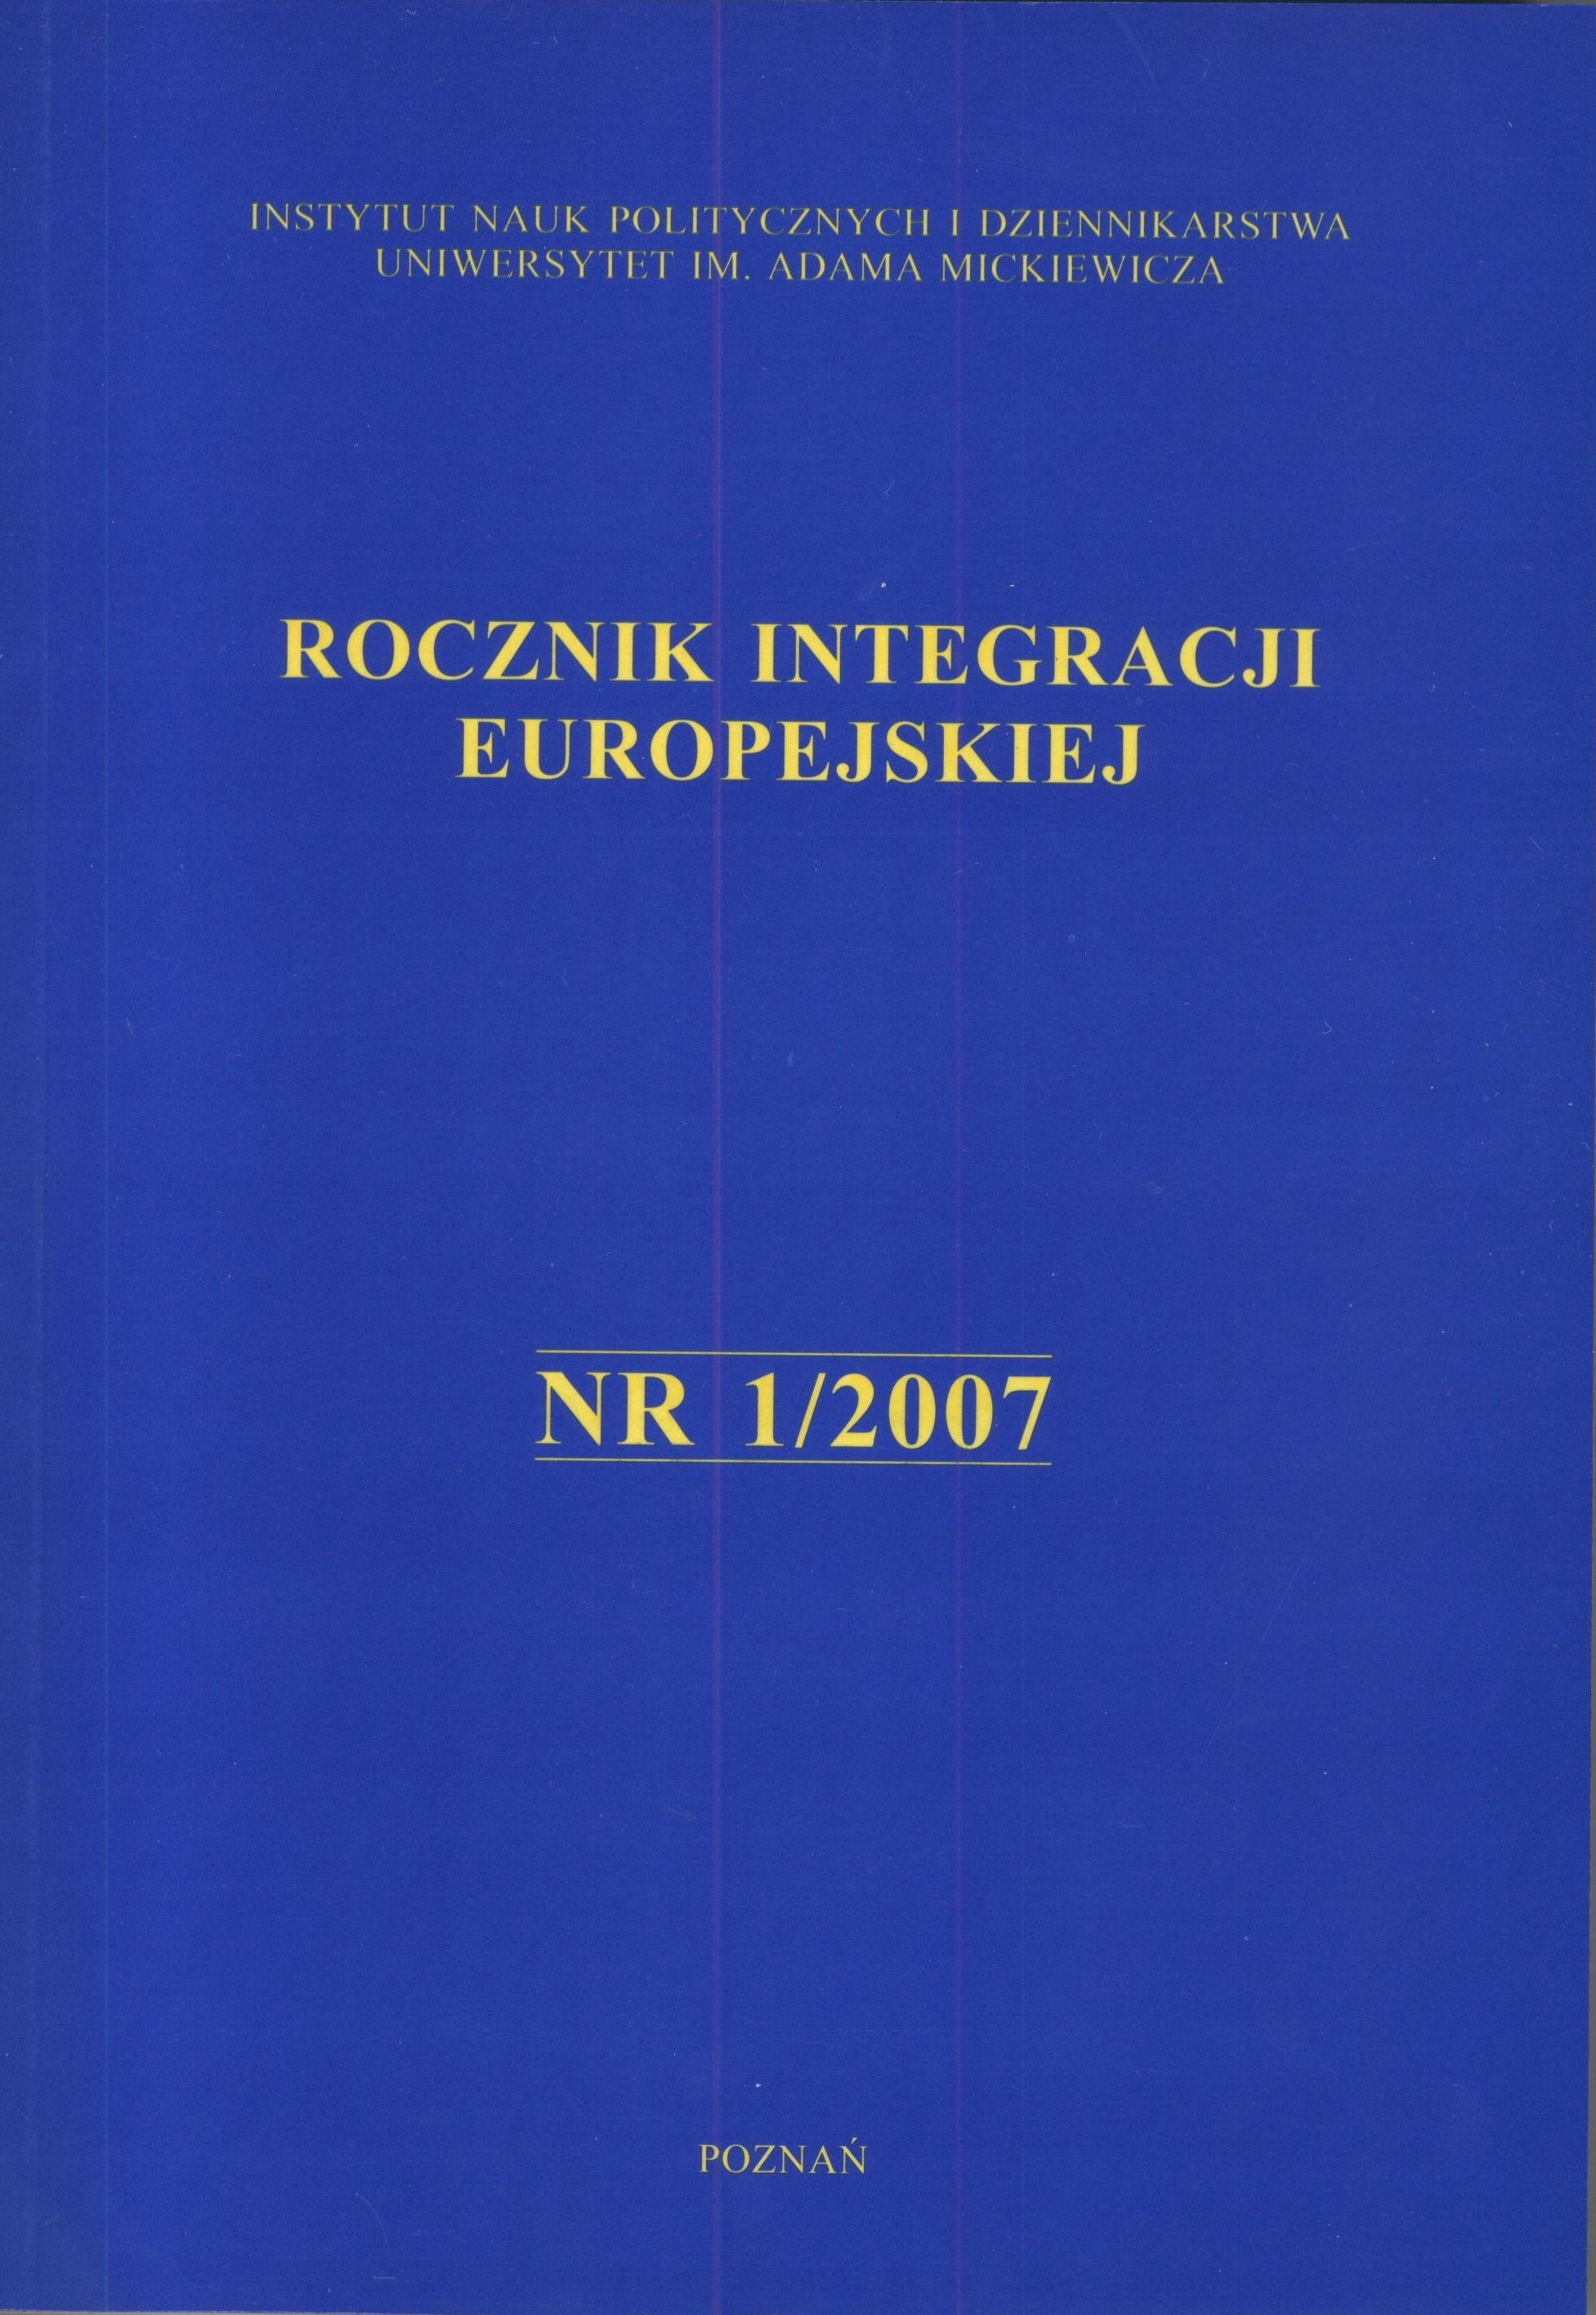 The Assessment of the Readiness of the Region of Wielkopolska for the Implem entation and Management of the Wielkopolski Operational Program of Regional Development Cover Image